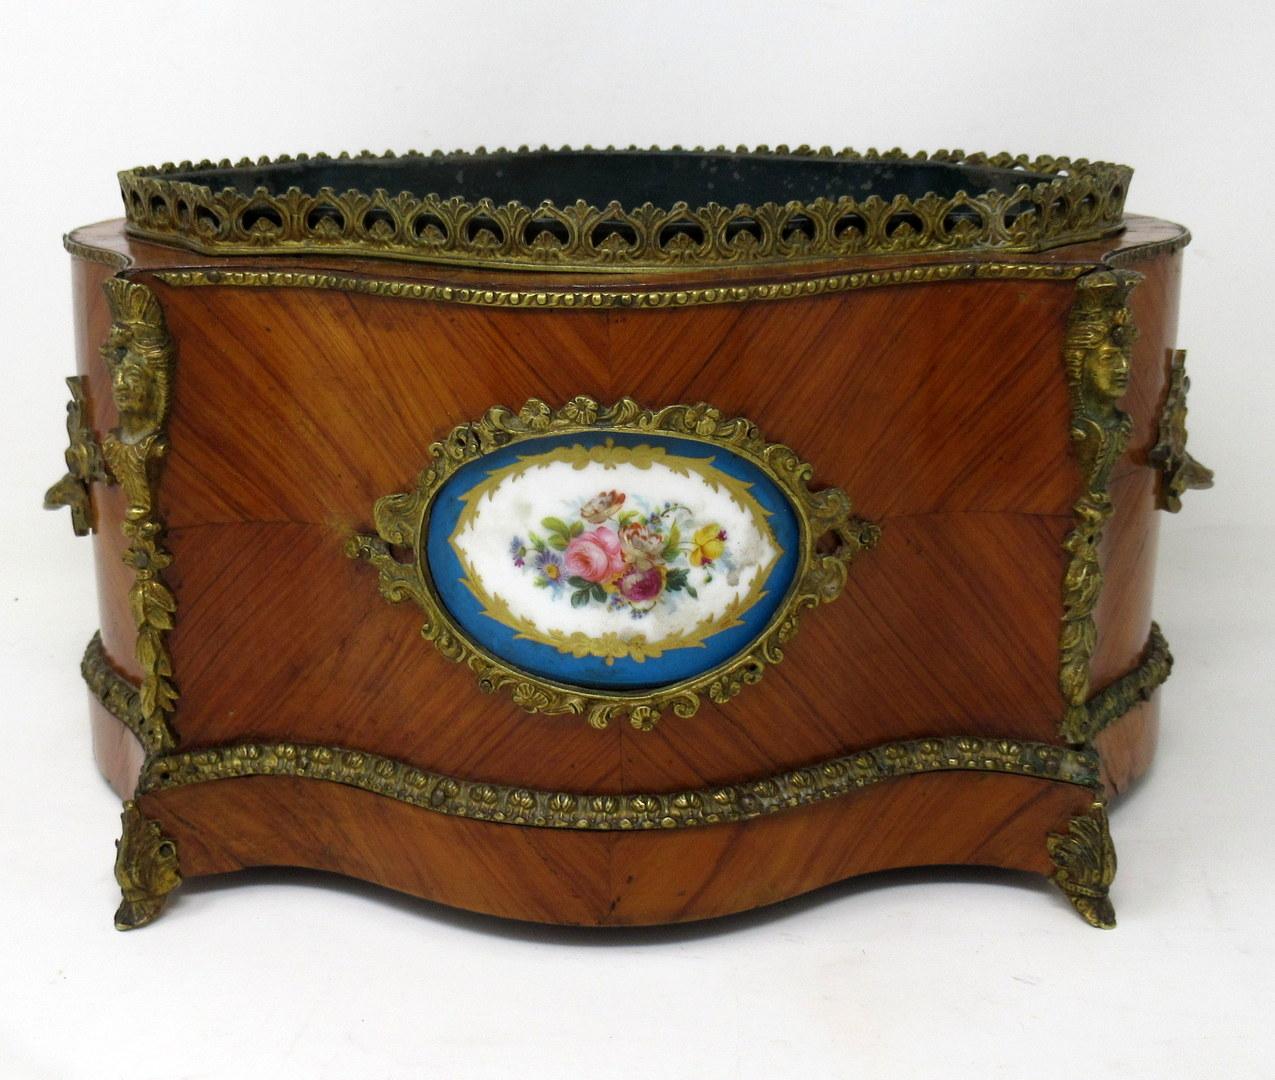 Stylish French twin handle kingwood jardinière of traditional oval form, with ormolu gallery pierced rail and ornate ormolu twin handles and central hand painted soft paste Sevres porcelain plaque depicting hand painted still life of flowers,